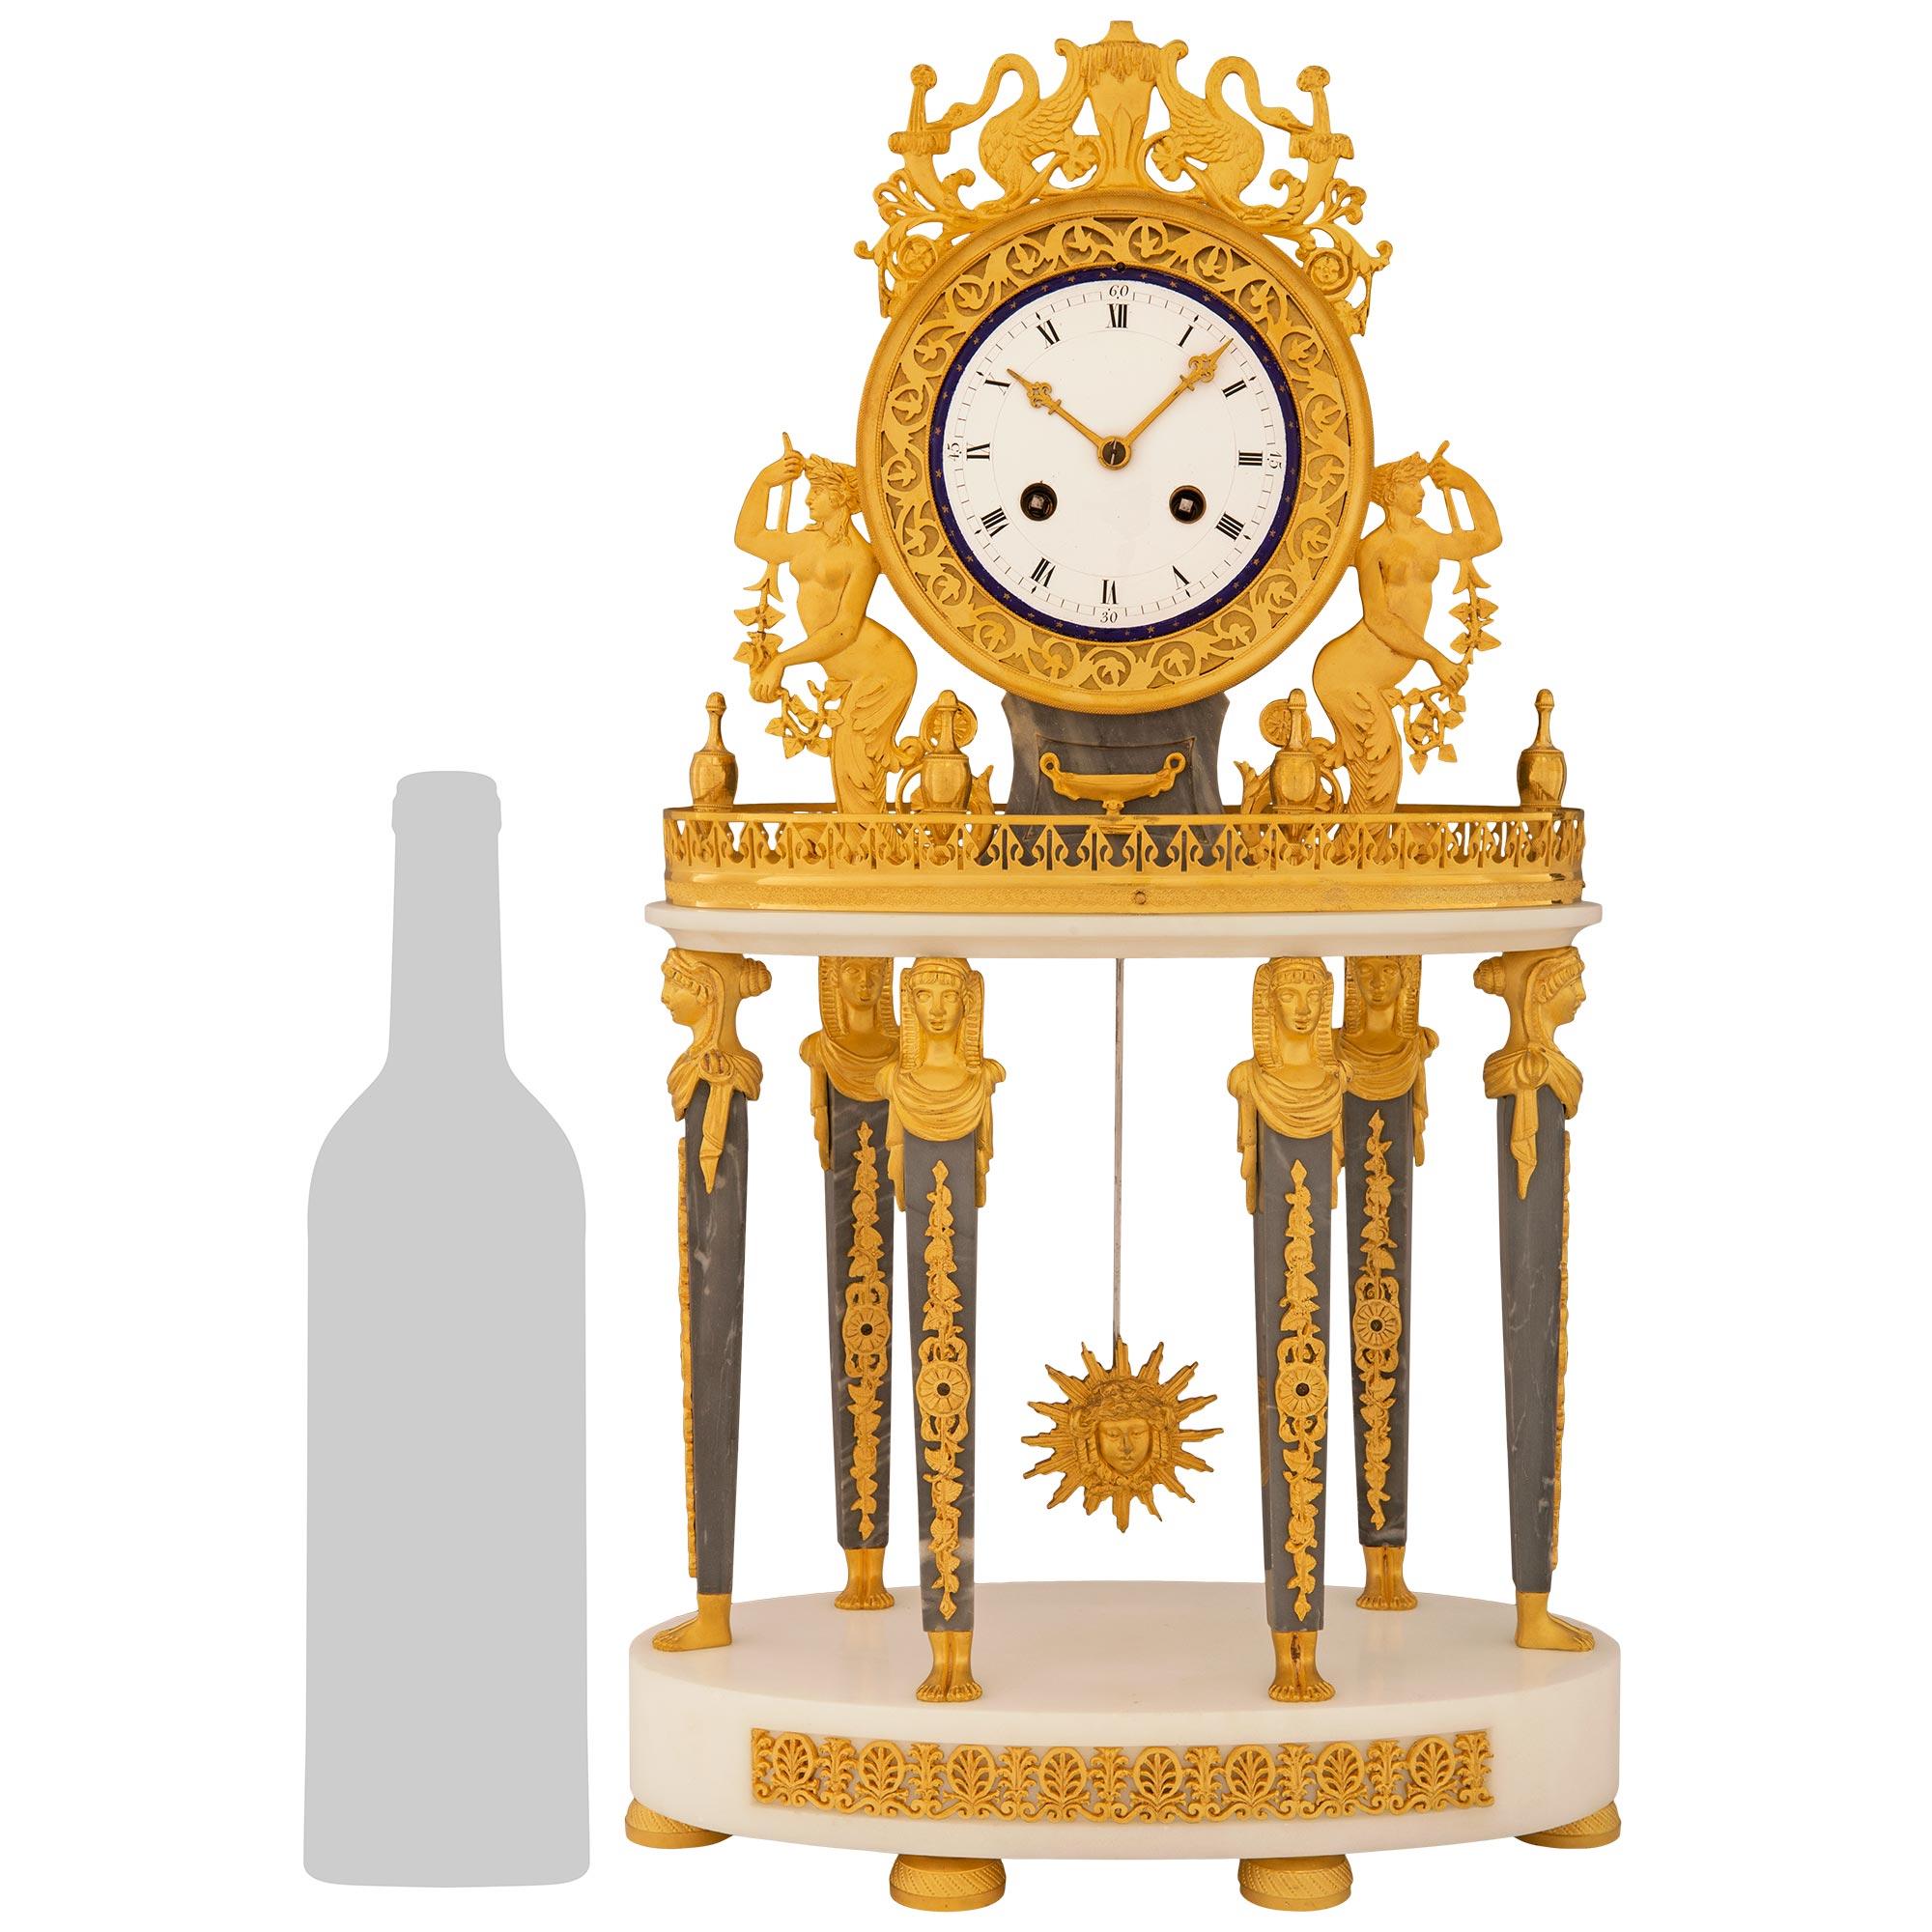 A stunning and high quality French 19th century Empire st. Gris st. Anne, white Carrara marble, and Ormolu clock. This beautiful clock is supported on a circular white Carrara marble base with a receded pierced palmette decorated Ormolu front band